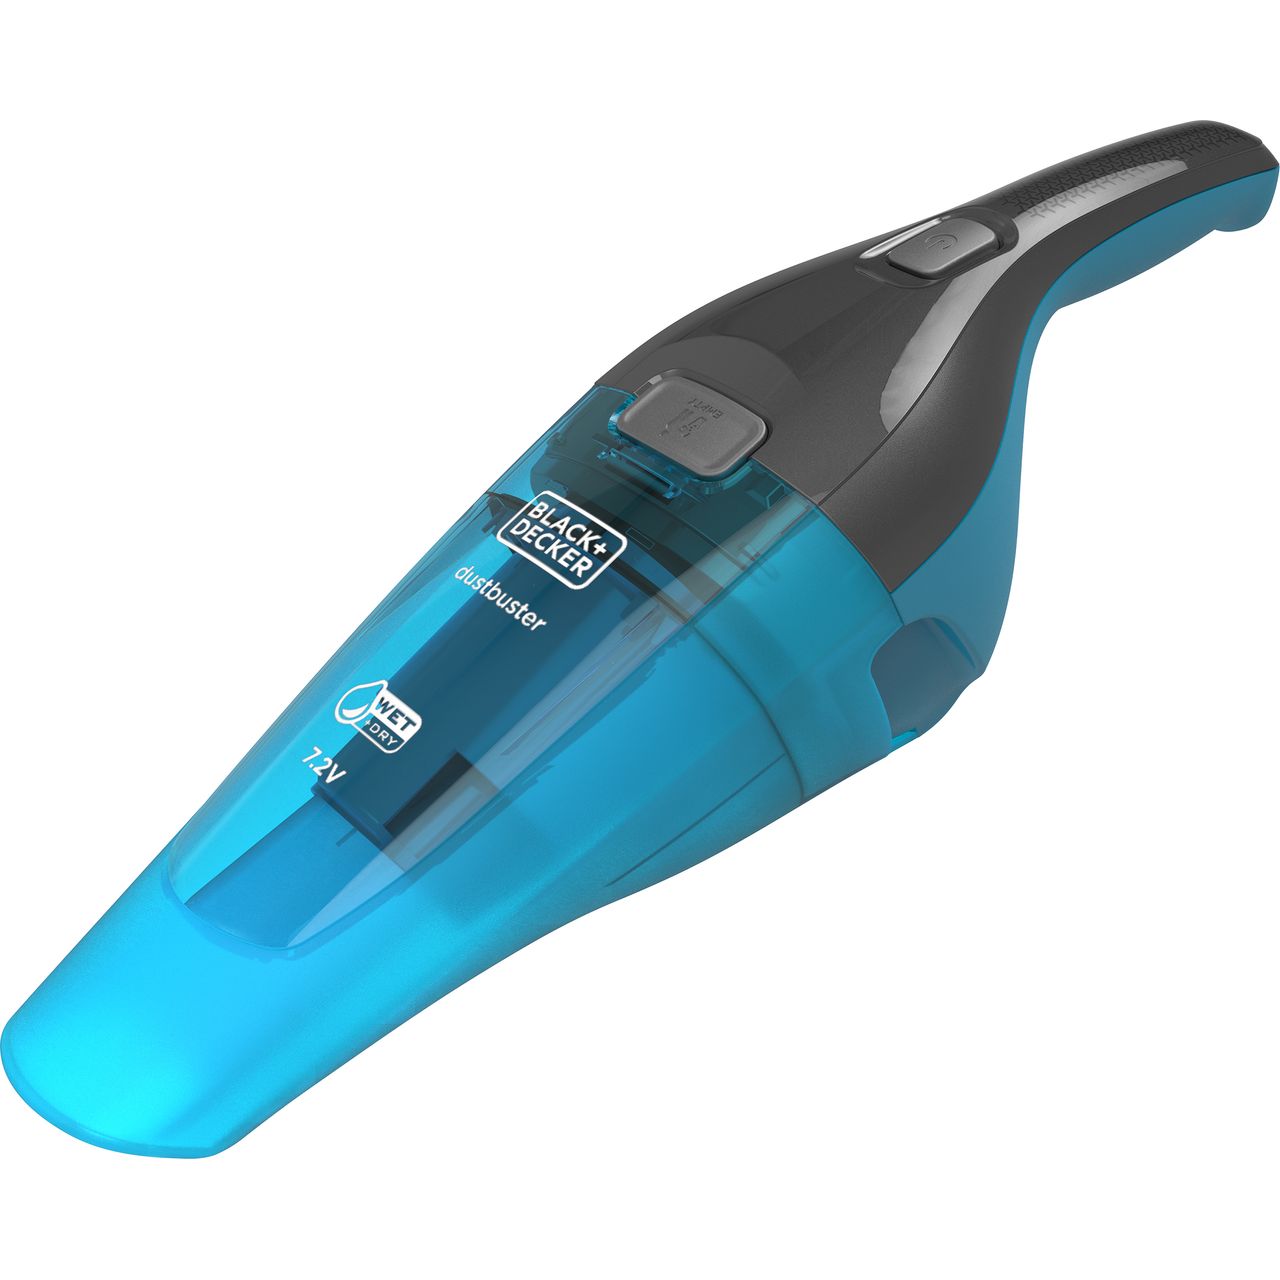 Black + Decker 7.2v Wet & Dry Dustbuster WDC215WA-GB Handheld Vacuum Cleaner with up to 10 Minutes Run Time Review